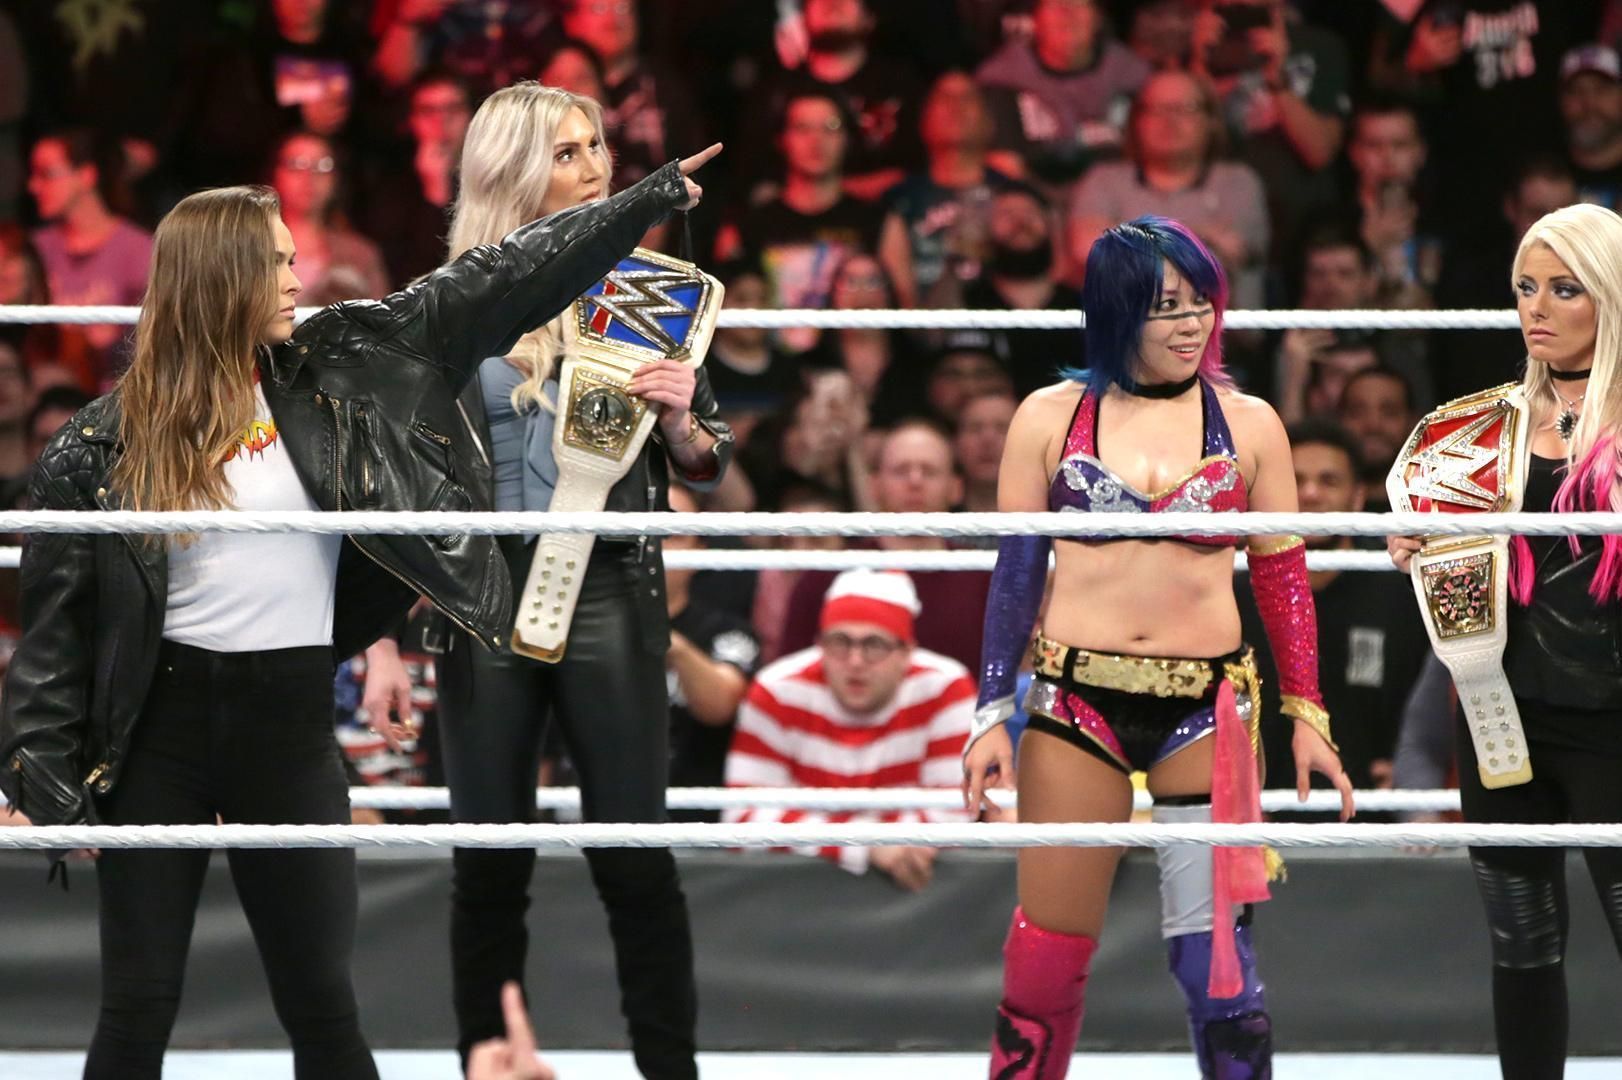 The closest Asuka and Rousey have come to a match.